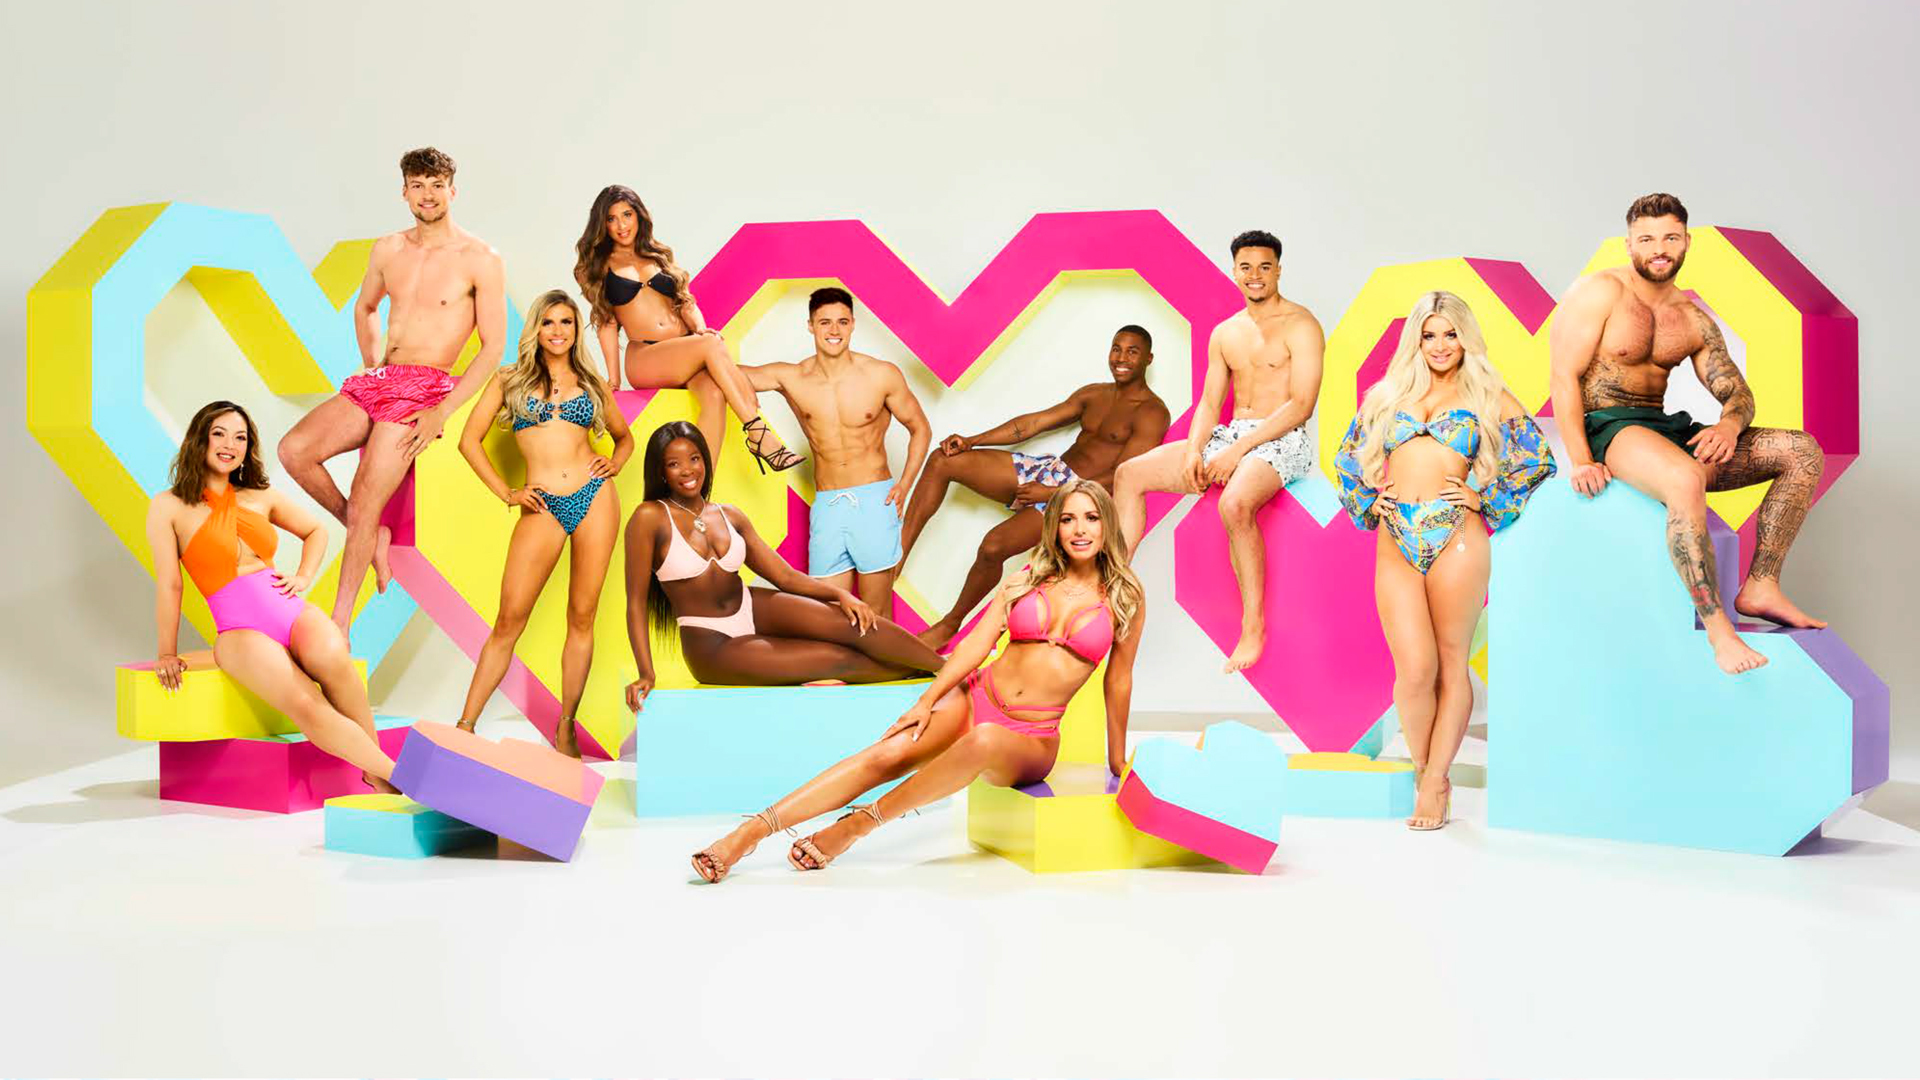 The contestants from "Love Island".